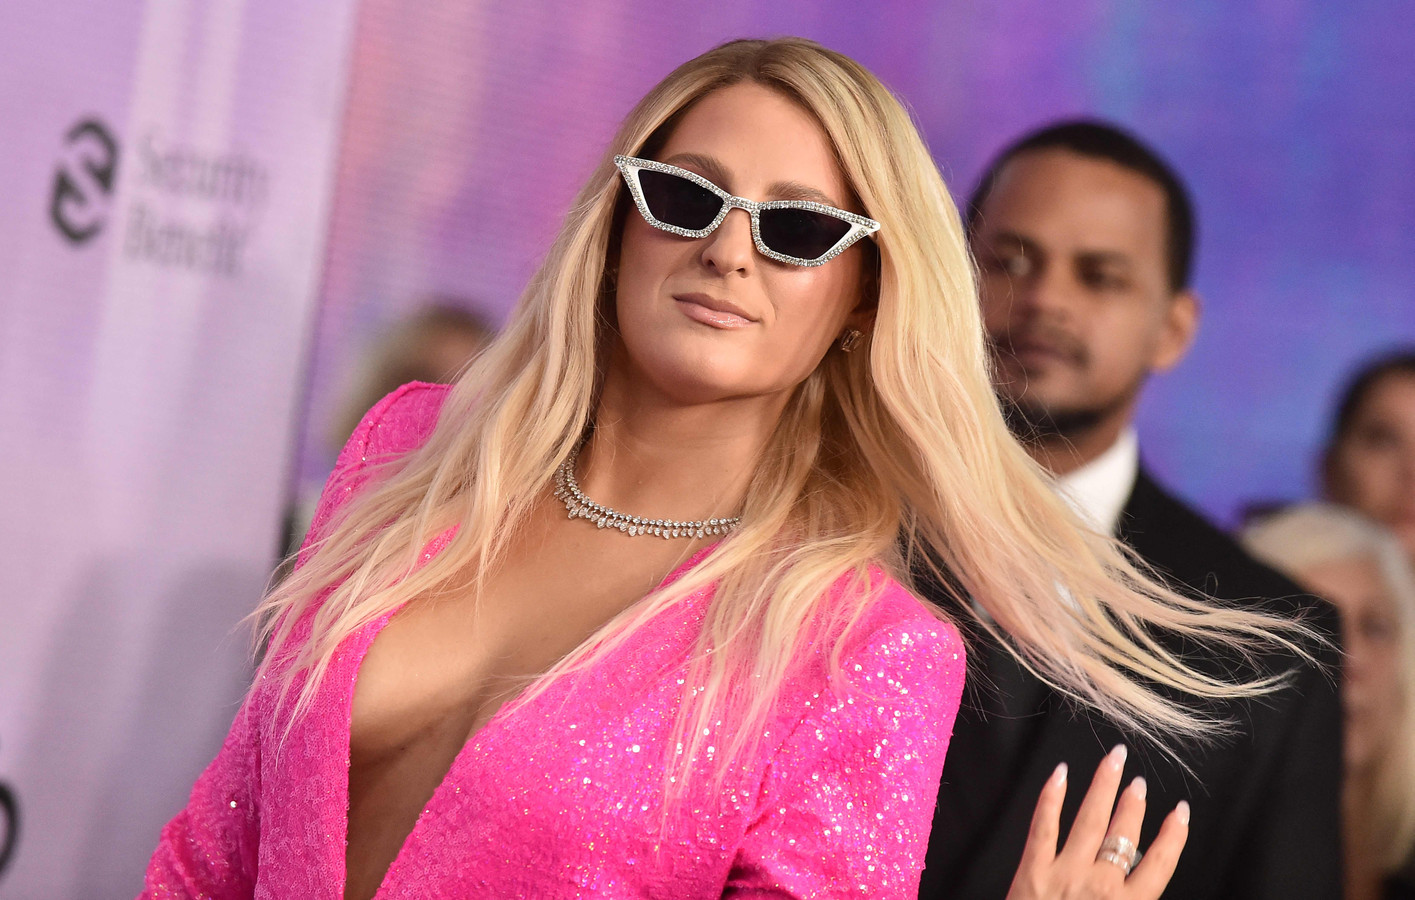 Meghan Trainor's Made You Look Ranks As Hot Adult Contemporary